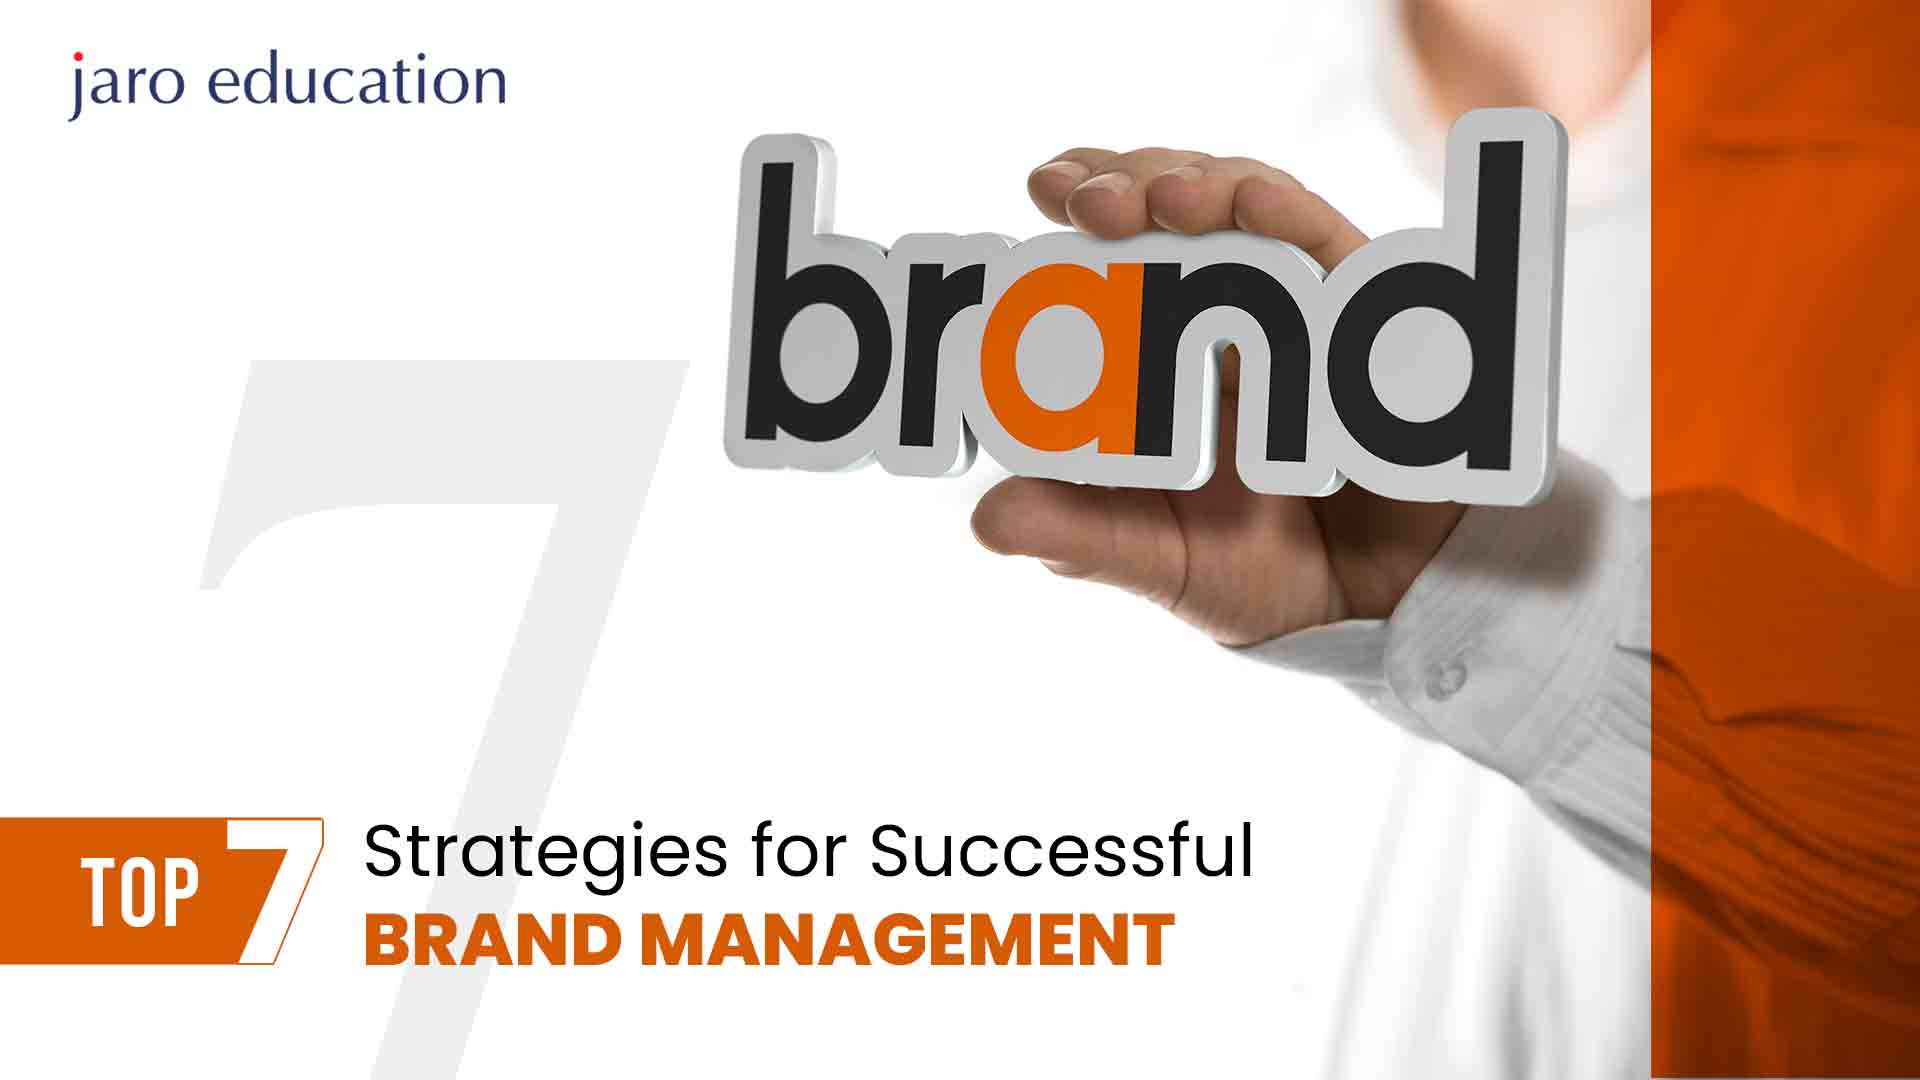 Top-7-Strategies-for-Successful-Brand-Management